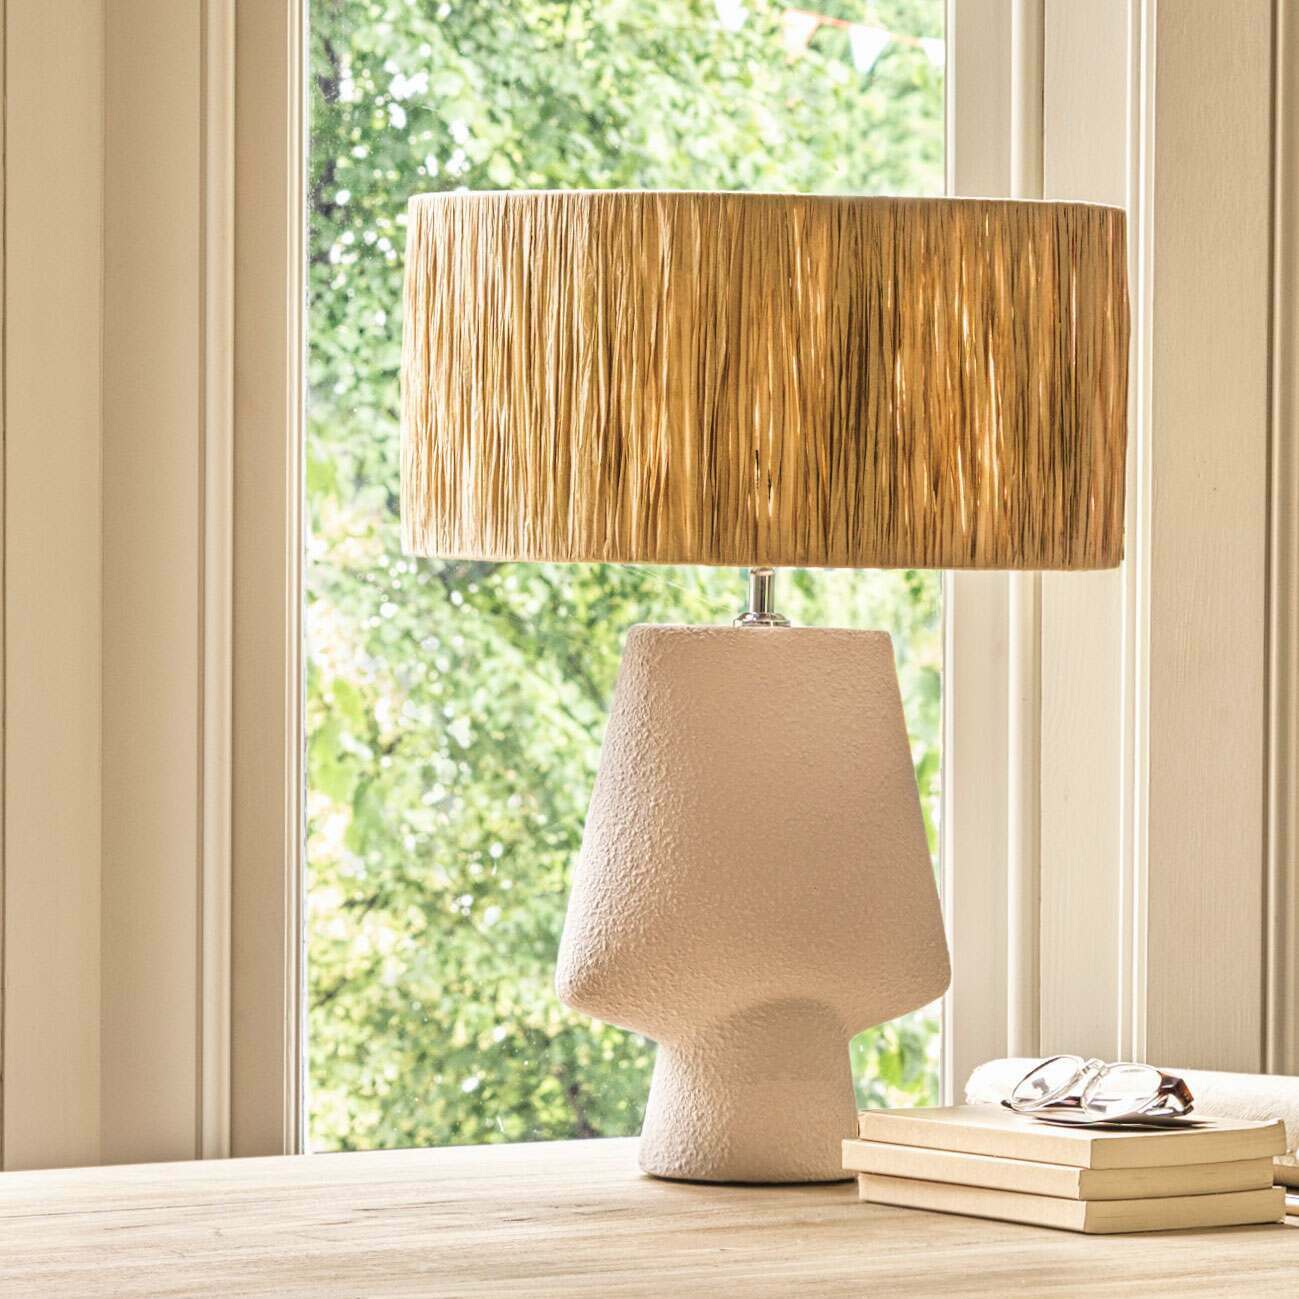 Read more about Graham and green dawson white ceramic lamp